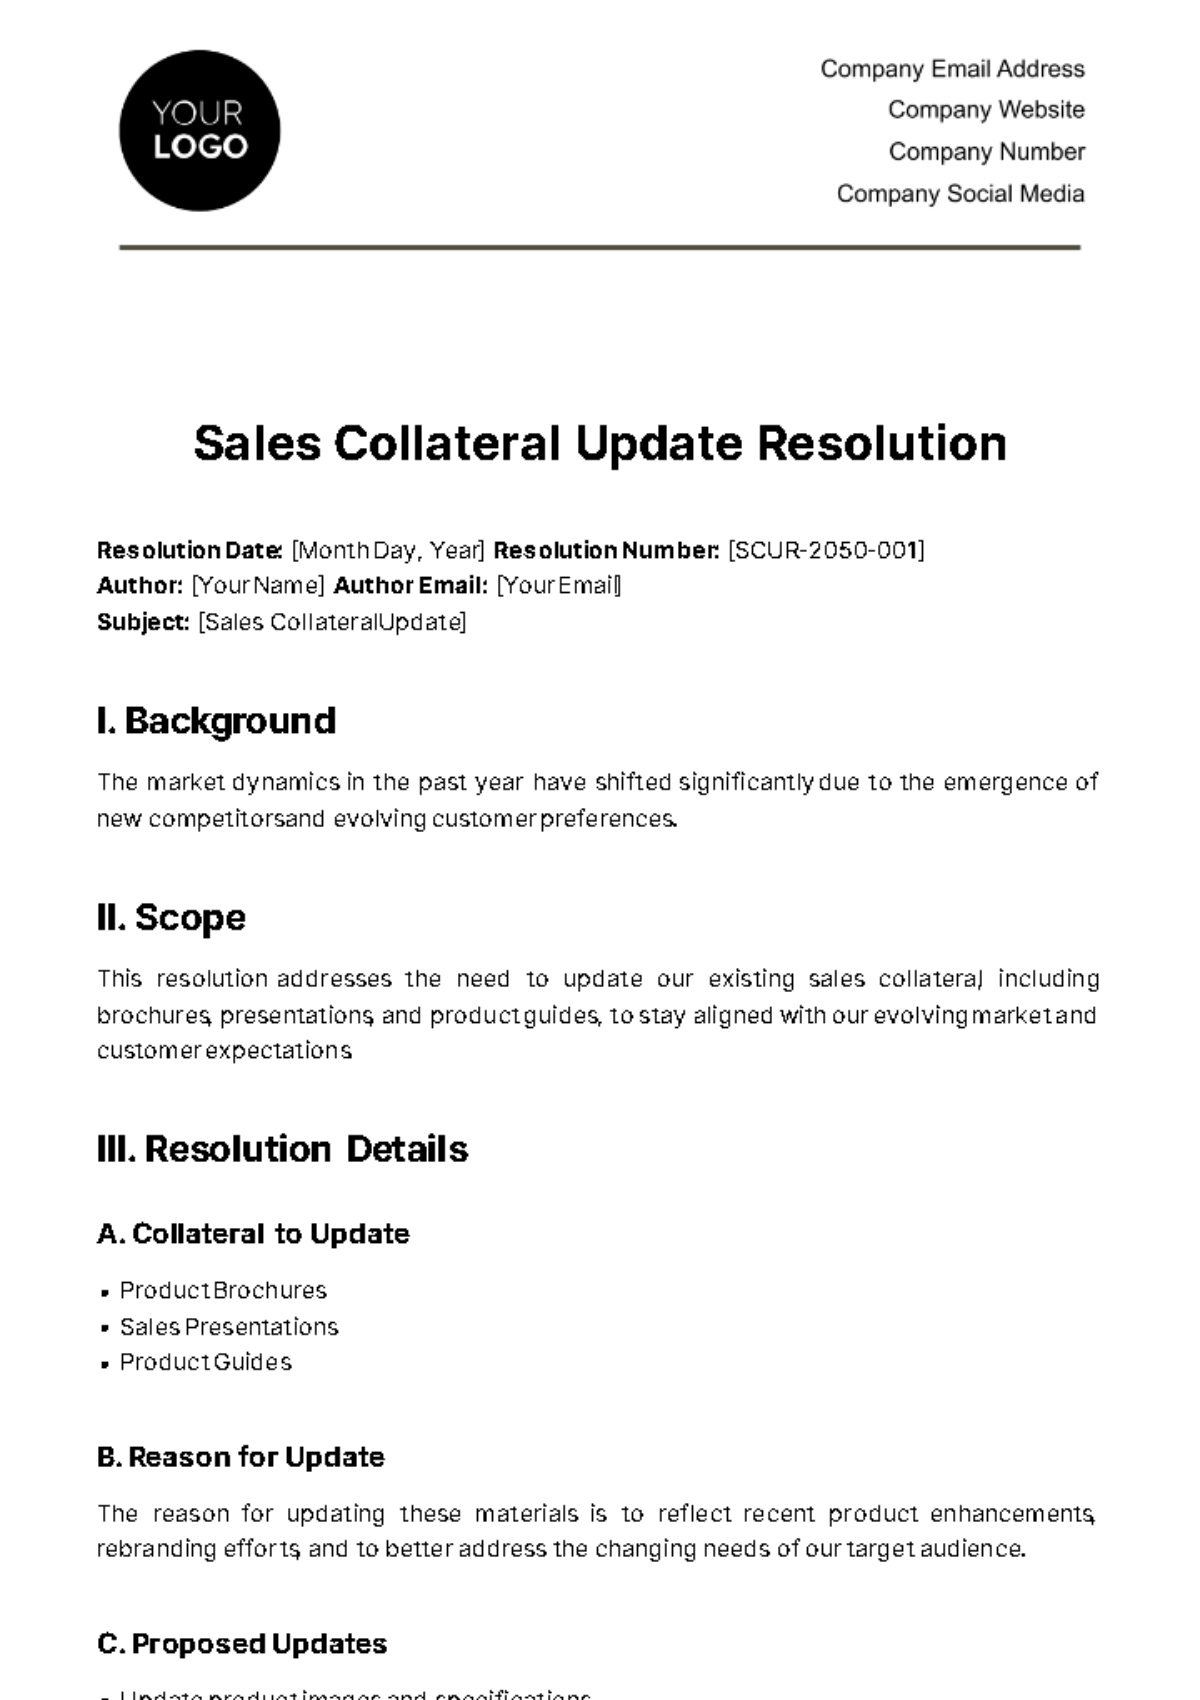 Free Sales Collateral Update Resolution Template